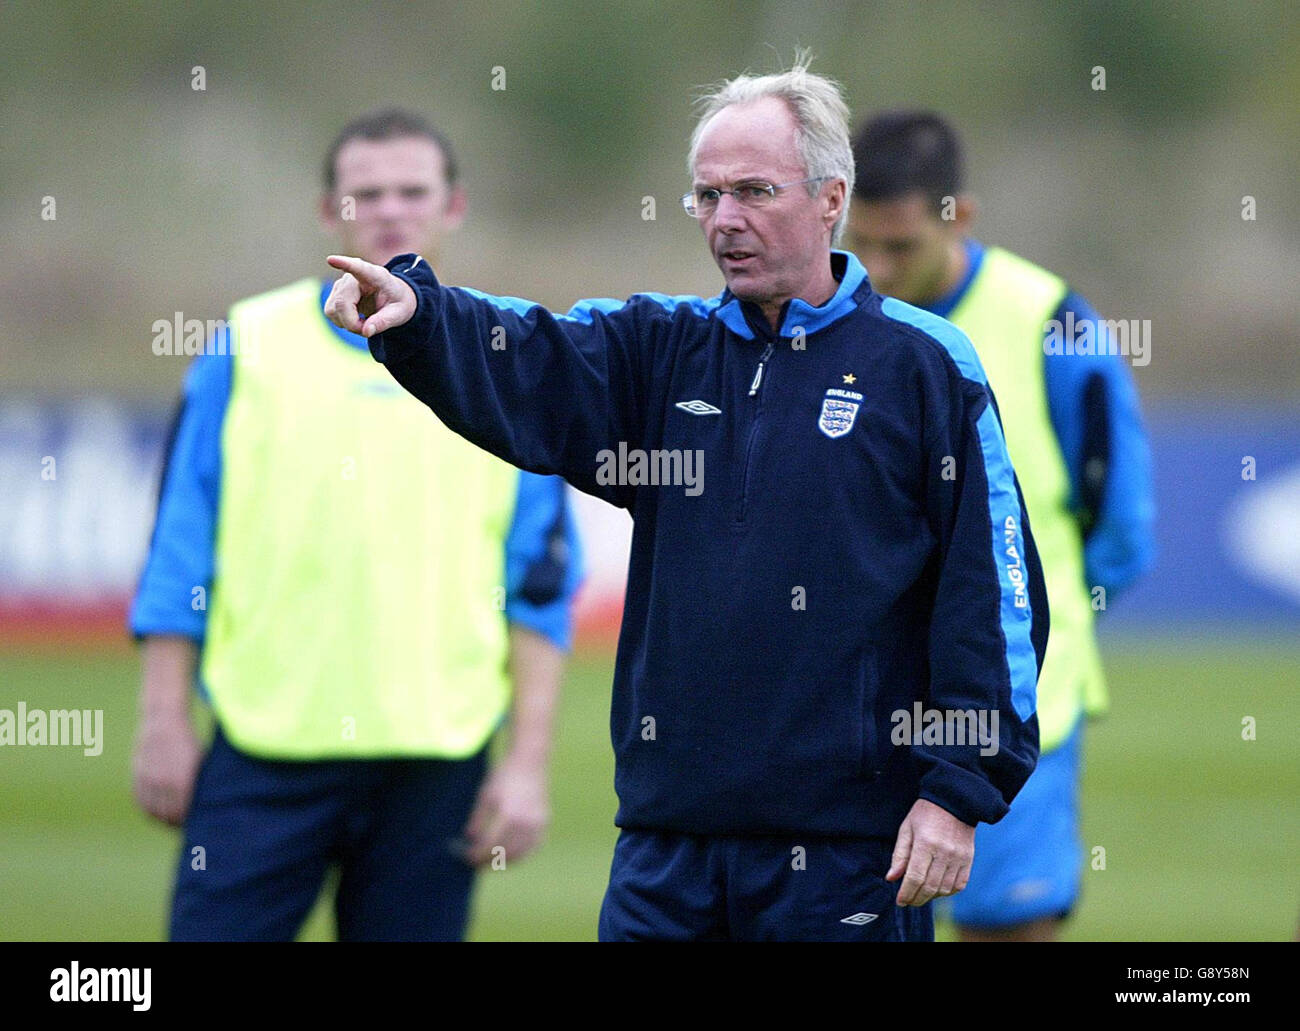 England manager Sven Goran Eriksson gestures to his players as Wayne Rooney (background) looks on during a training session at Carrington Training Ground, Manchester, Tuesday October 4, 2005. England play Austria in their World Cup qualifying match on Saturday. PRESS ASSOCIATION Photo. Photo credit should read: Martin Rickett/PA. Stock Photo